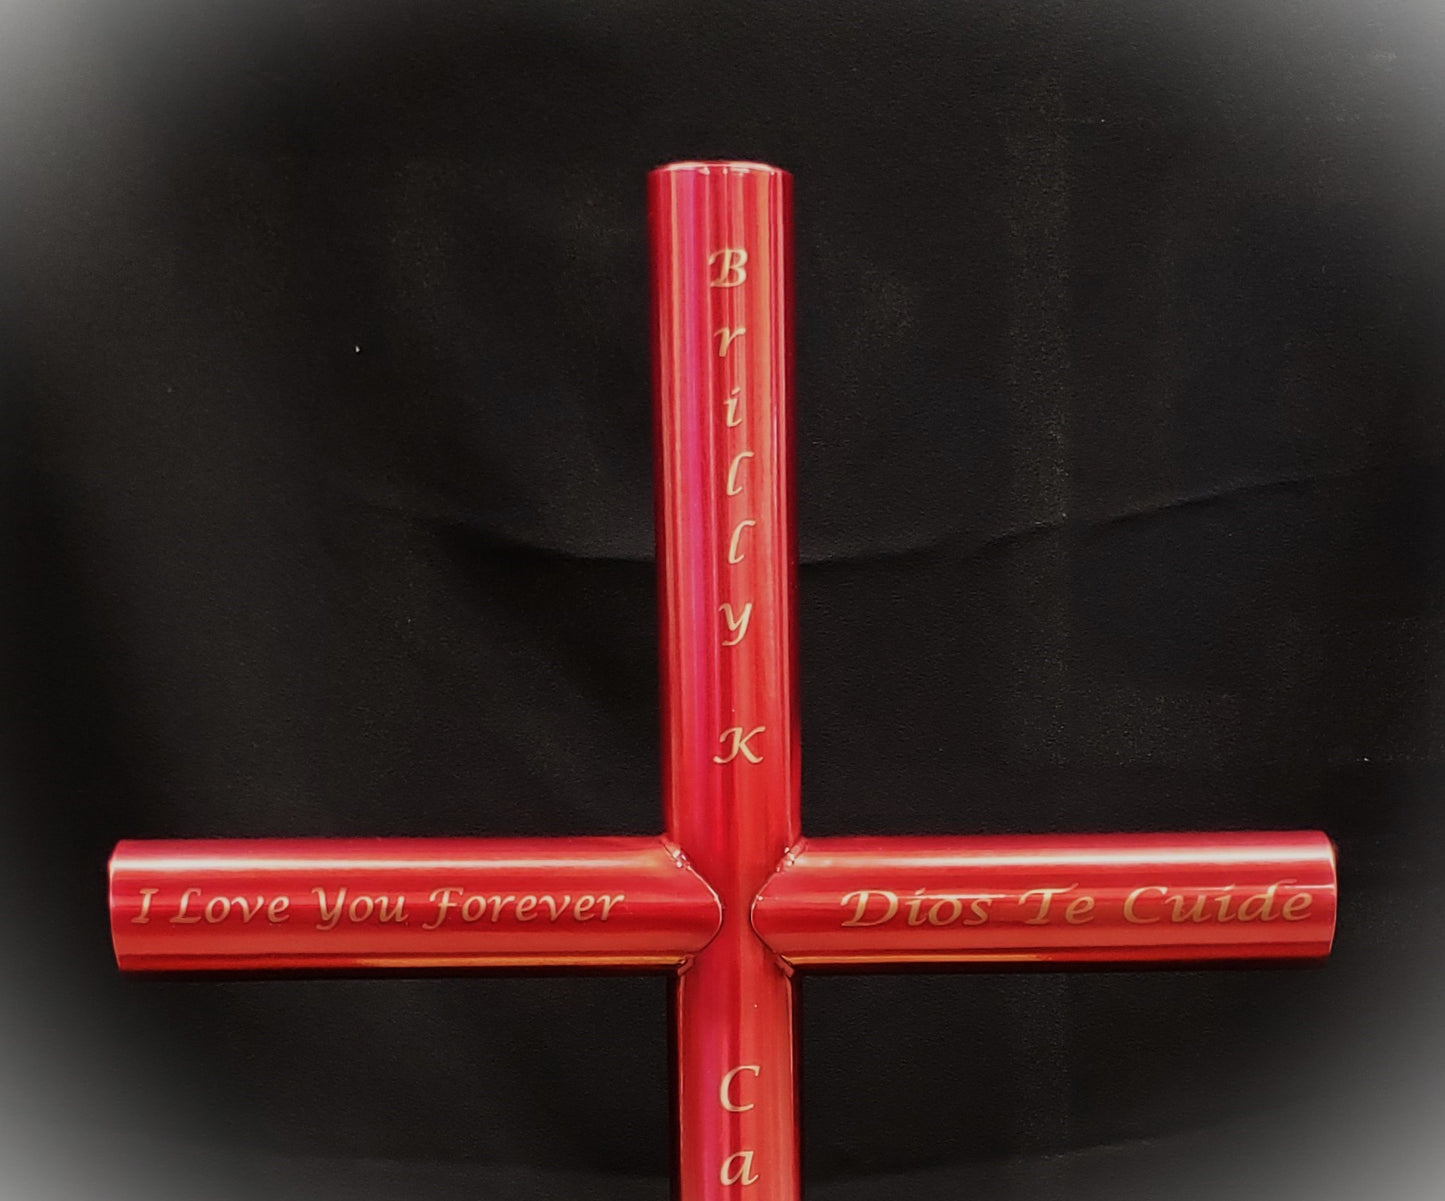 Everlasting Cross Finished in a Berry Pink, has Unique Engraving For Your Memorial Keepsake, USA Manufactured, Cremation Urn, In the Garden, Outside cross or Roadside cross, Church Memorial, For Our Family, the Memorial Gift that Last Forever